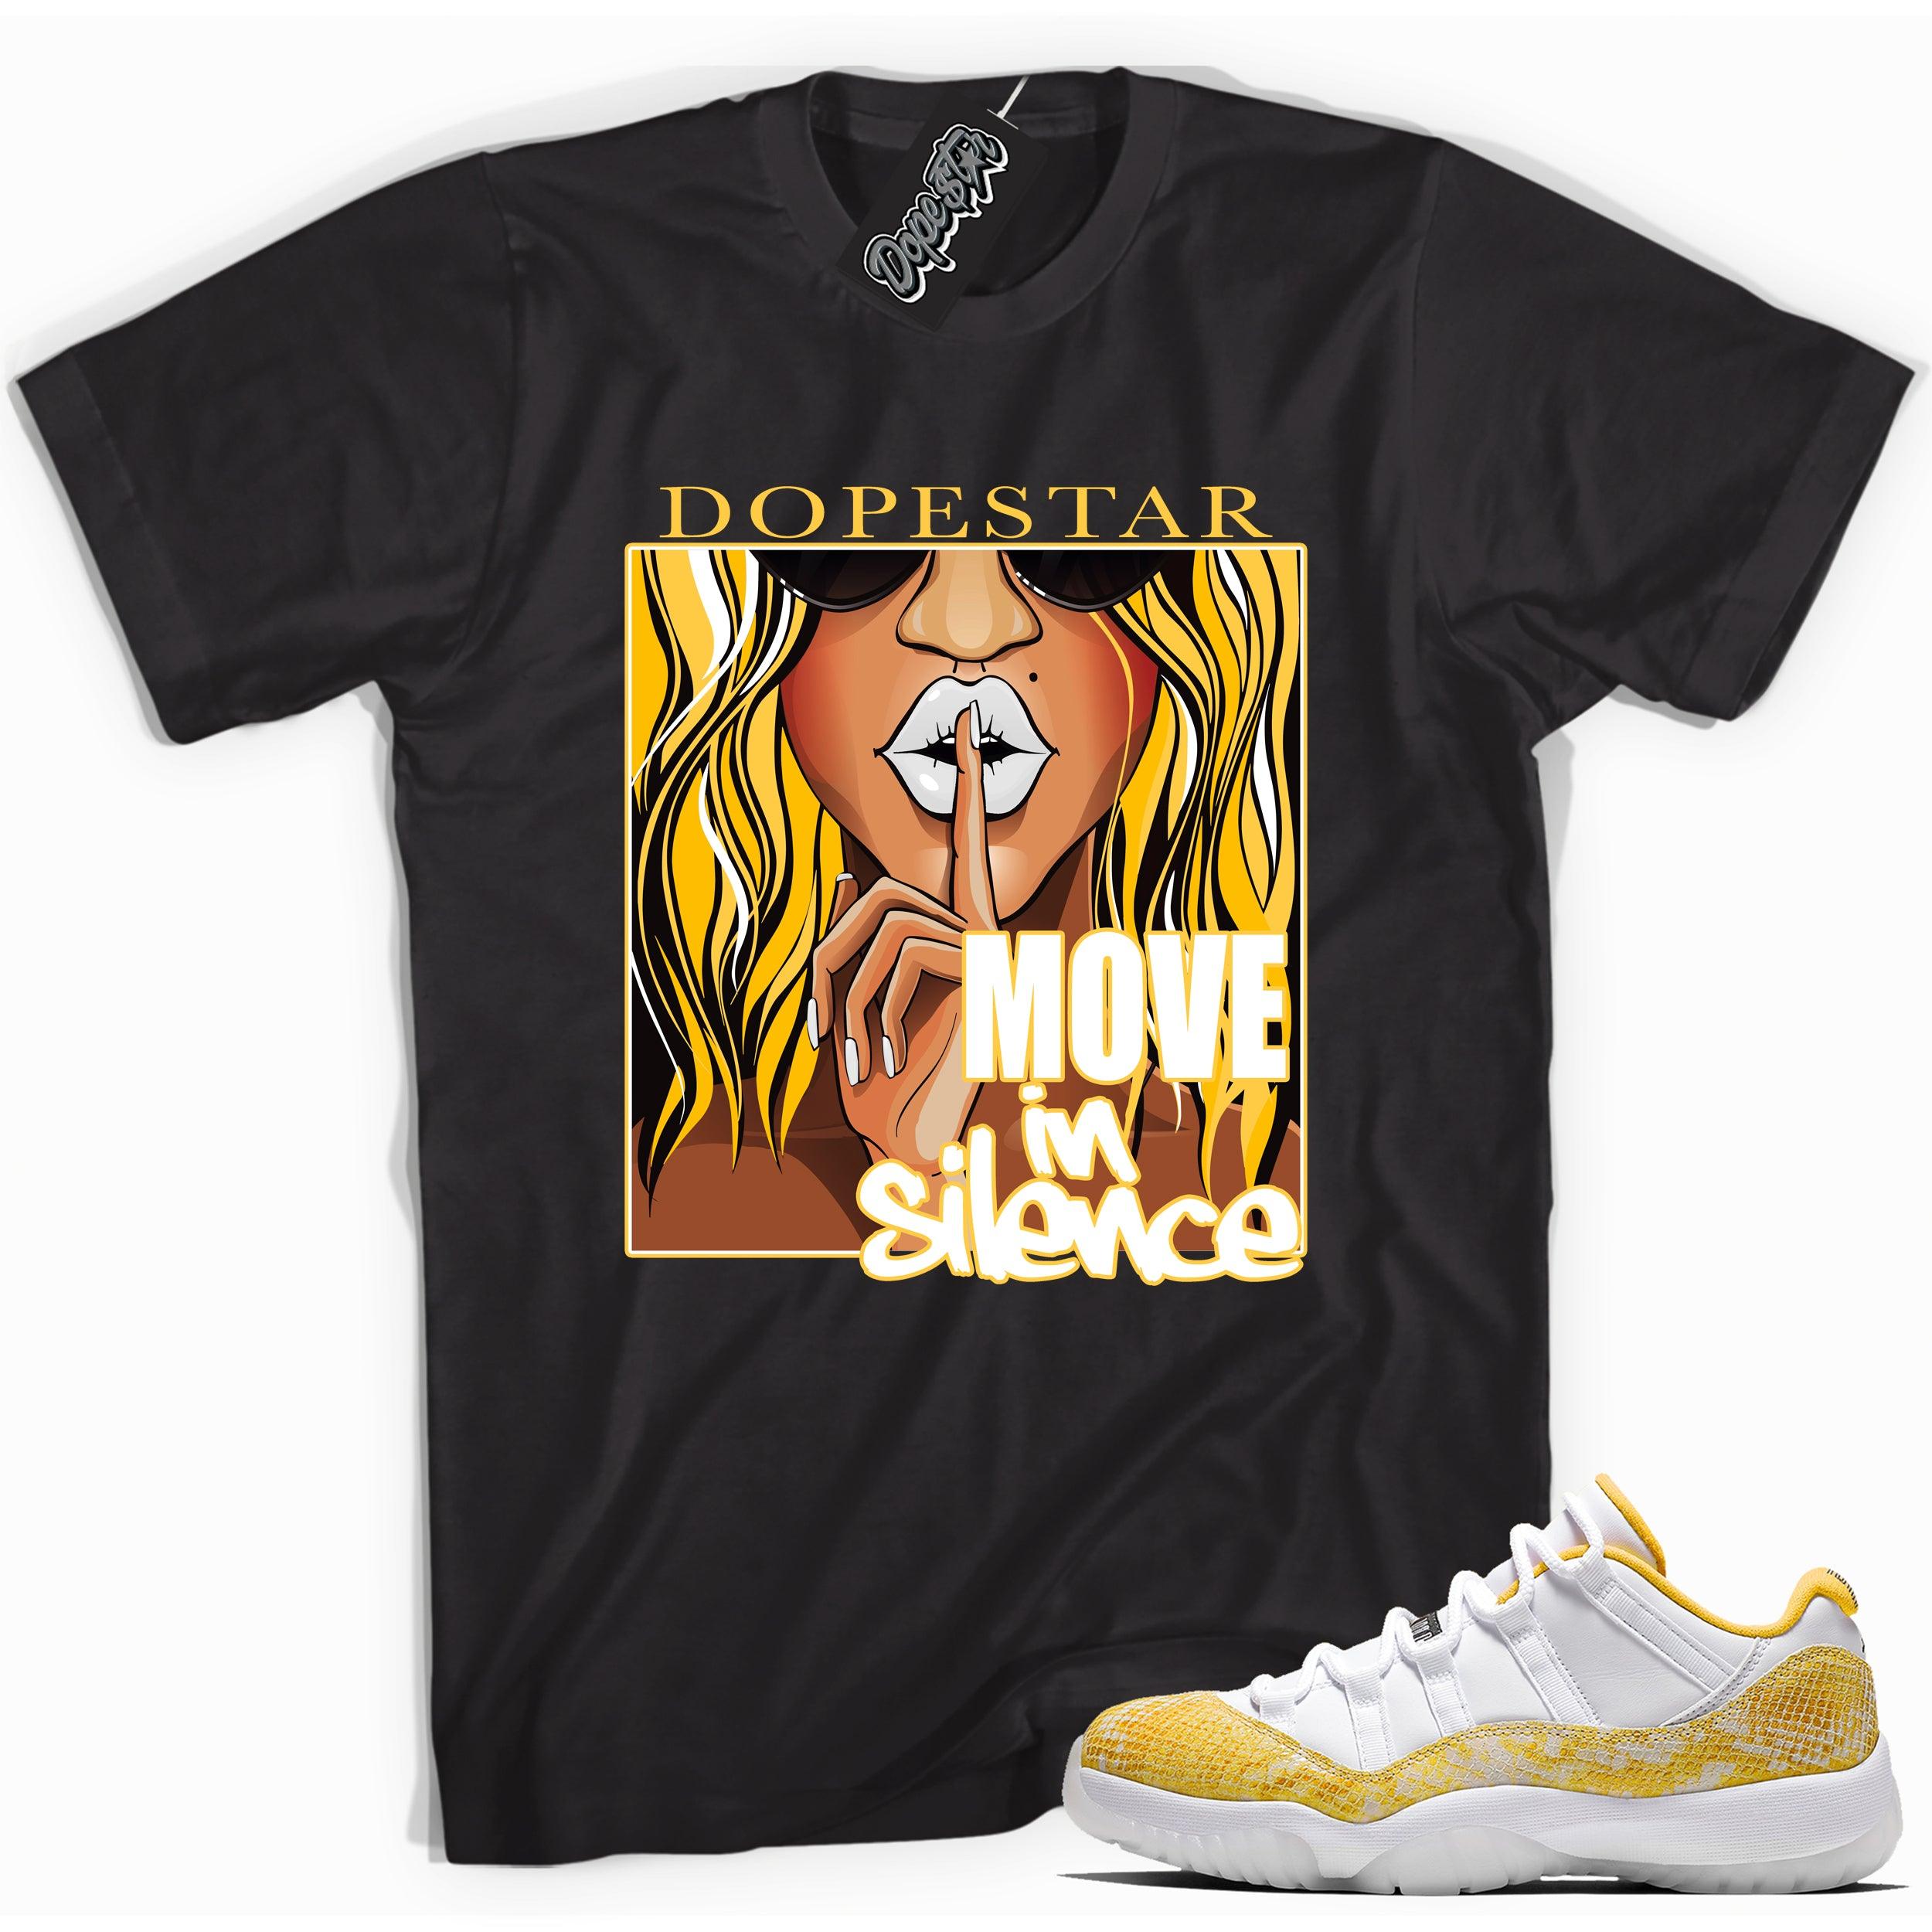 Cool black graphic tee with 'move in silence' print, that perfectly matches  Air Jordan 11 Low Yellow Snakeskin sneakers